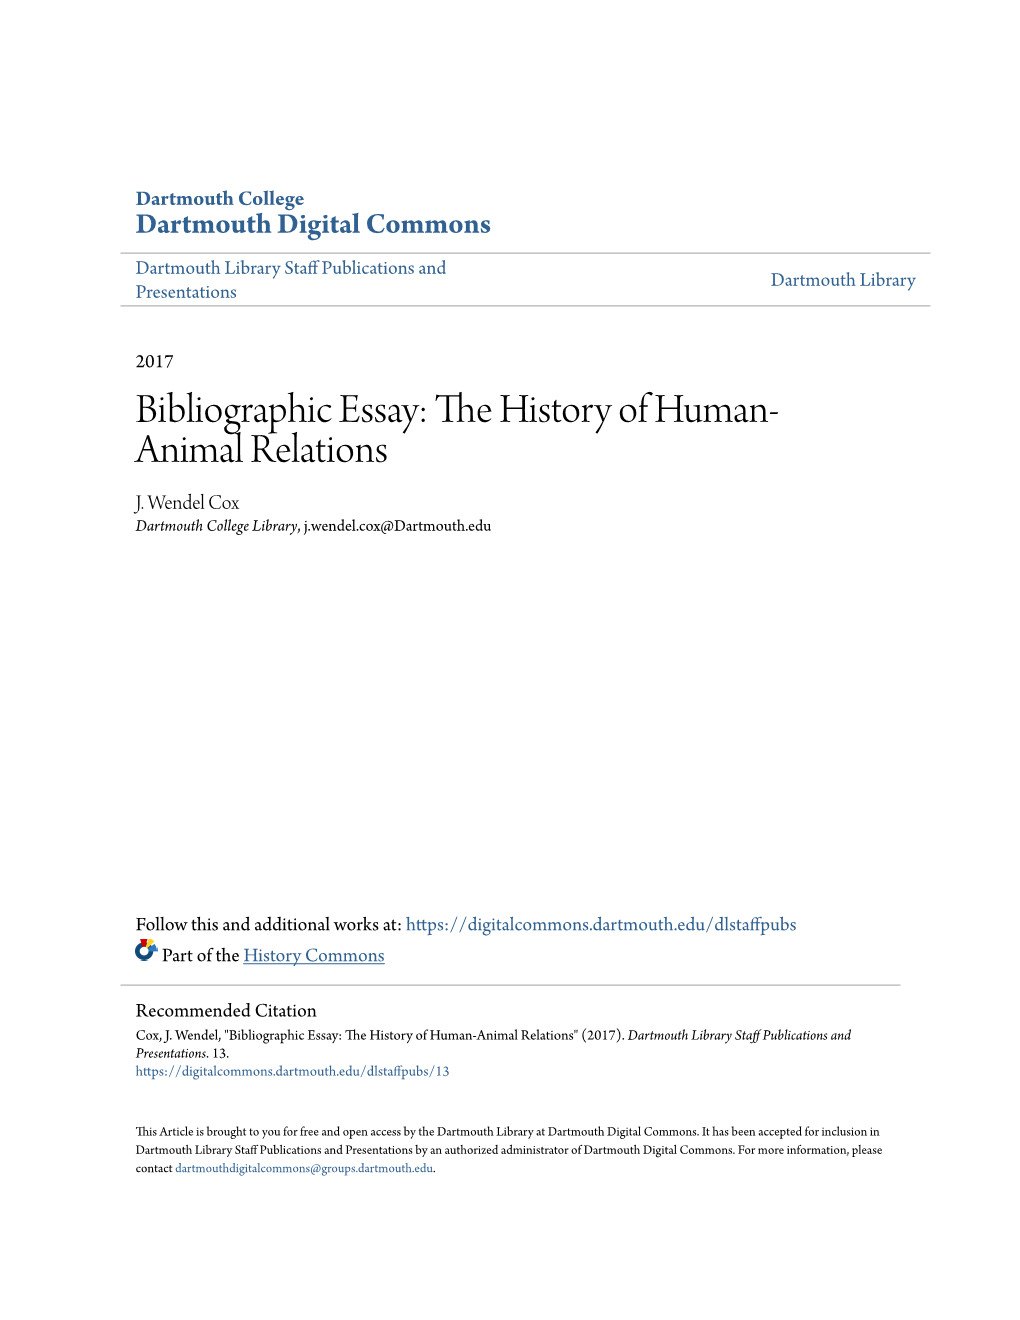 The History of Human-Animal Relations